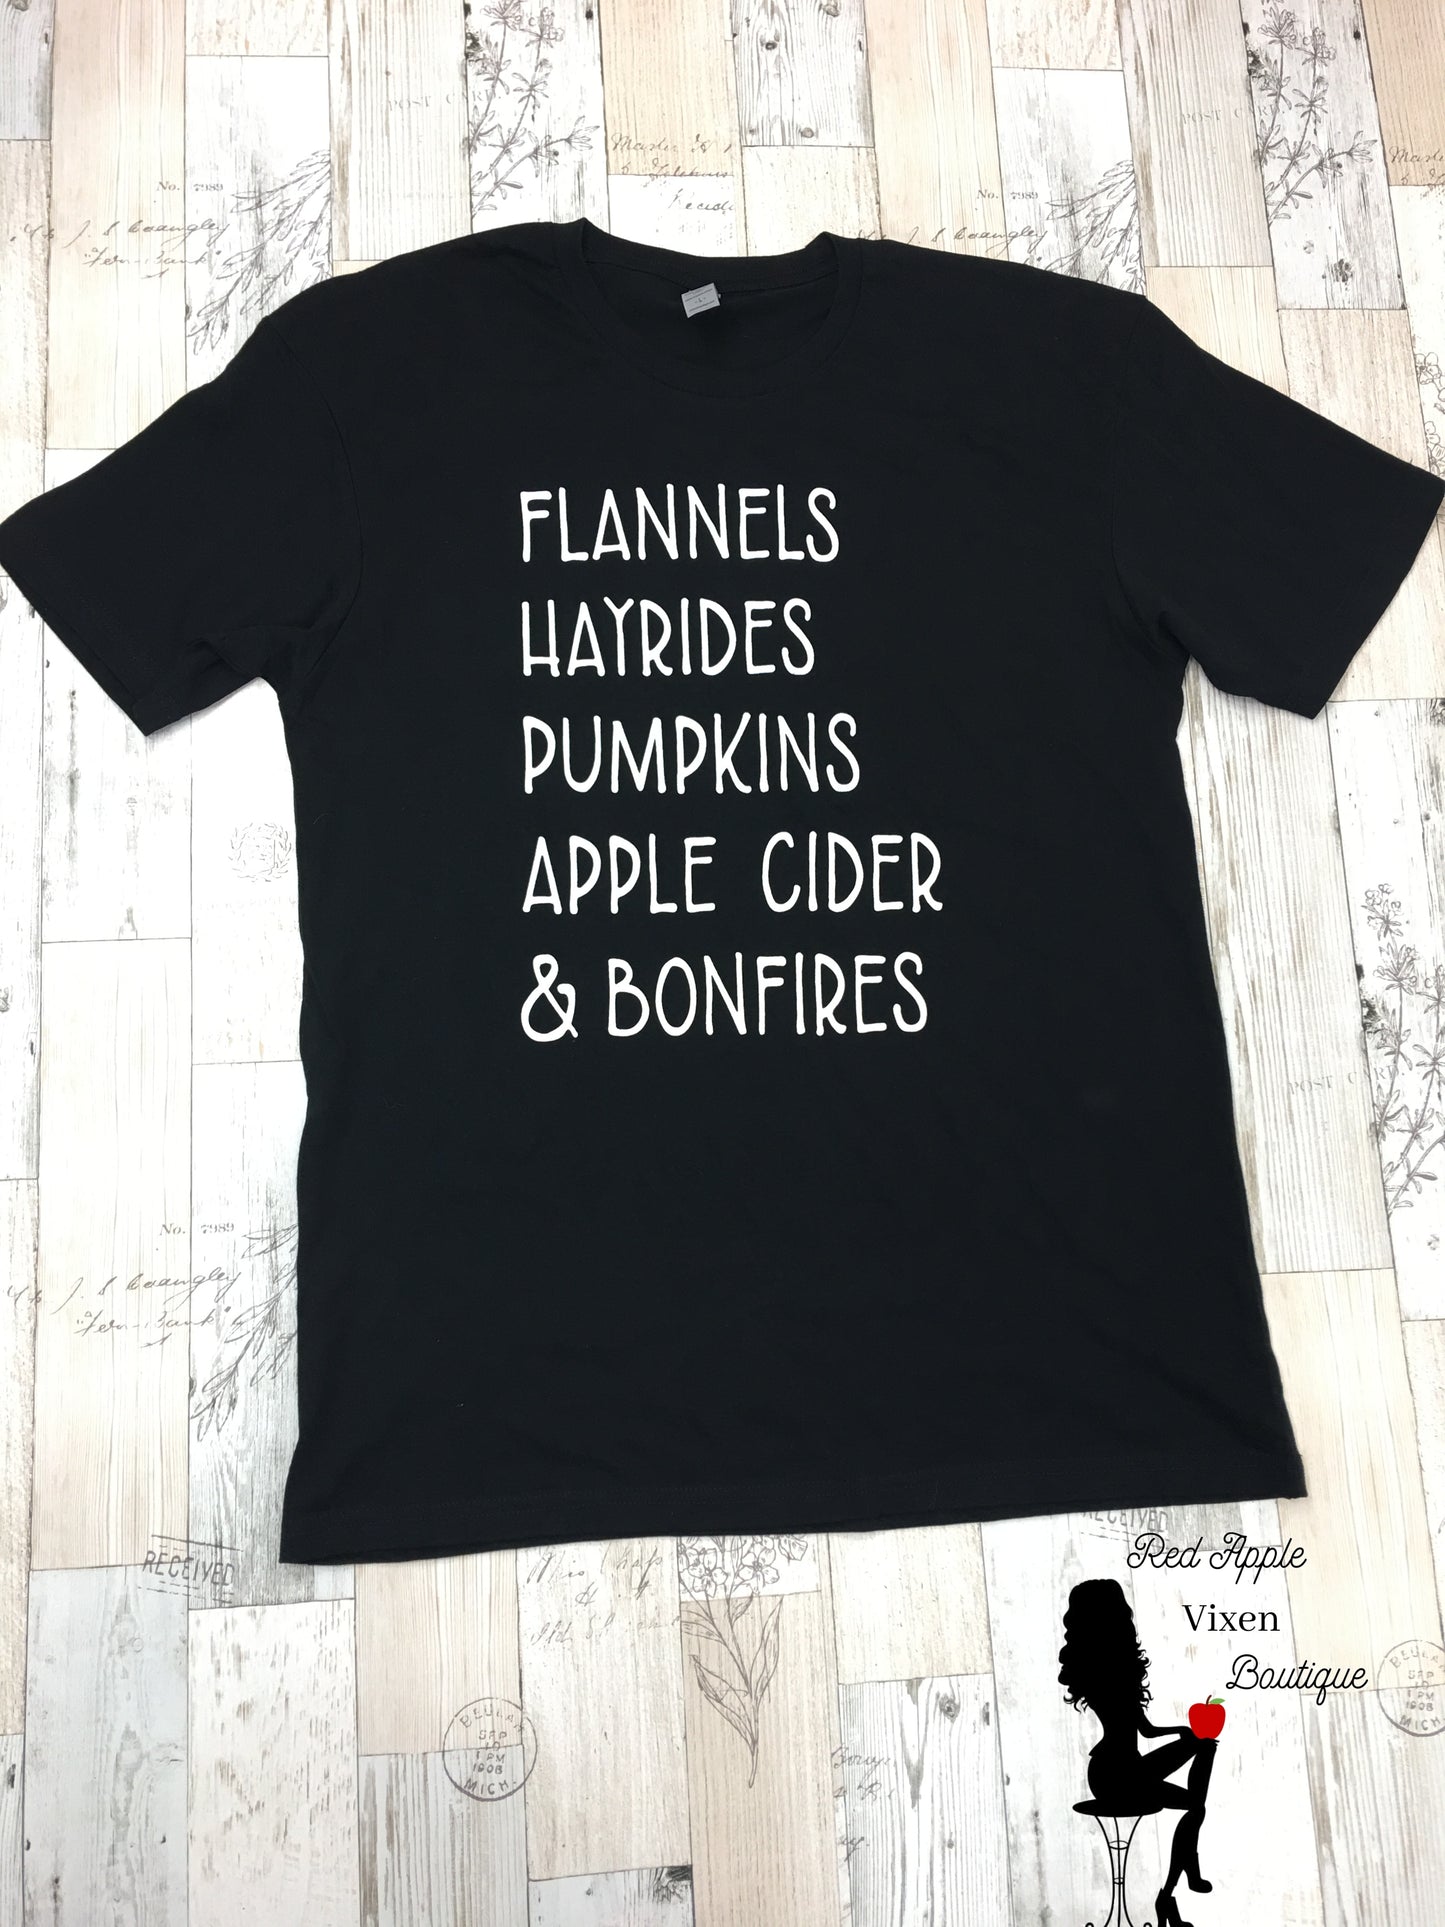 Fall Favorite Graphic Tee - Red Apple Vixen Boutique